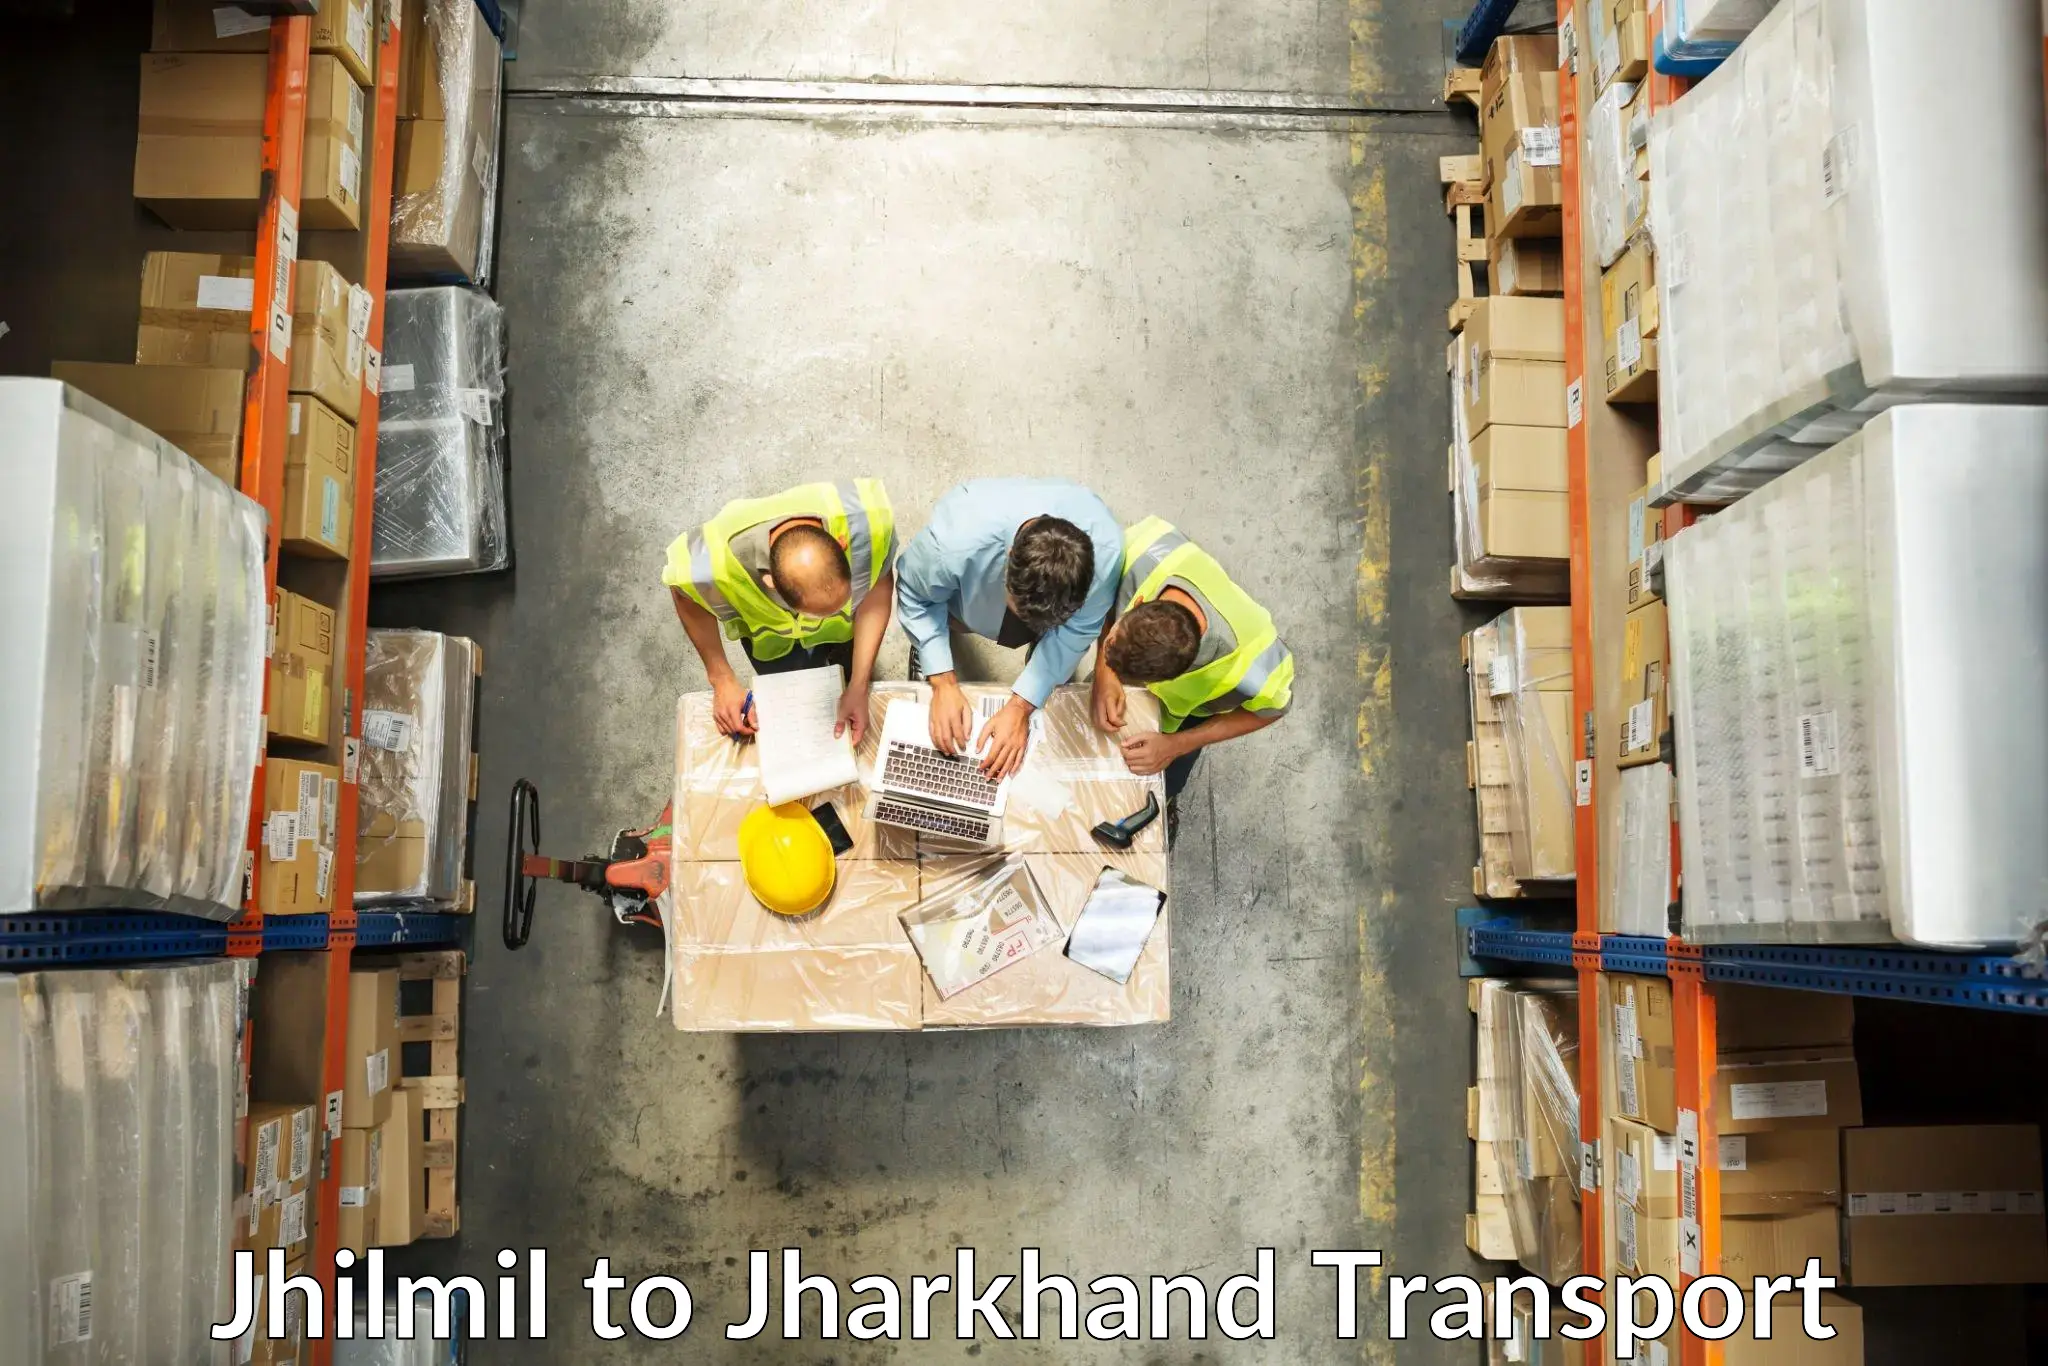 Transport services Jhilmil to Jharkhand